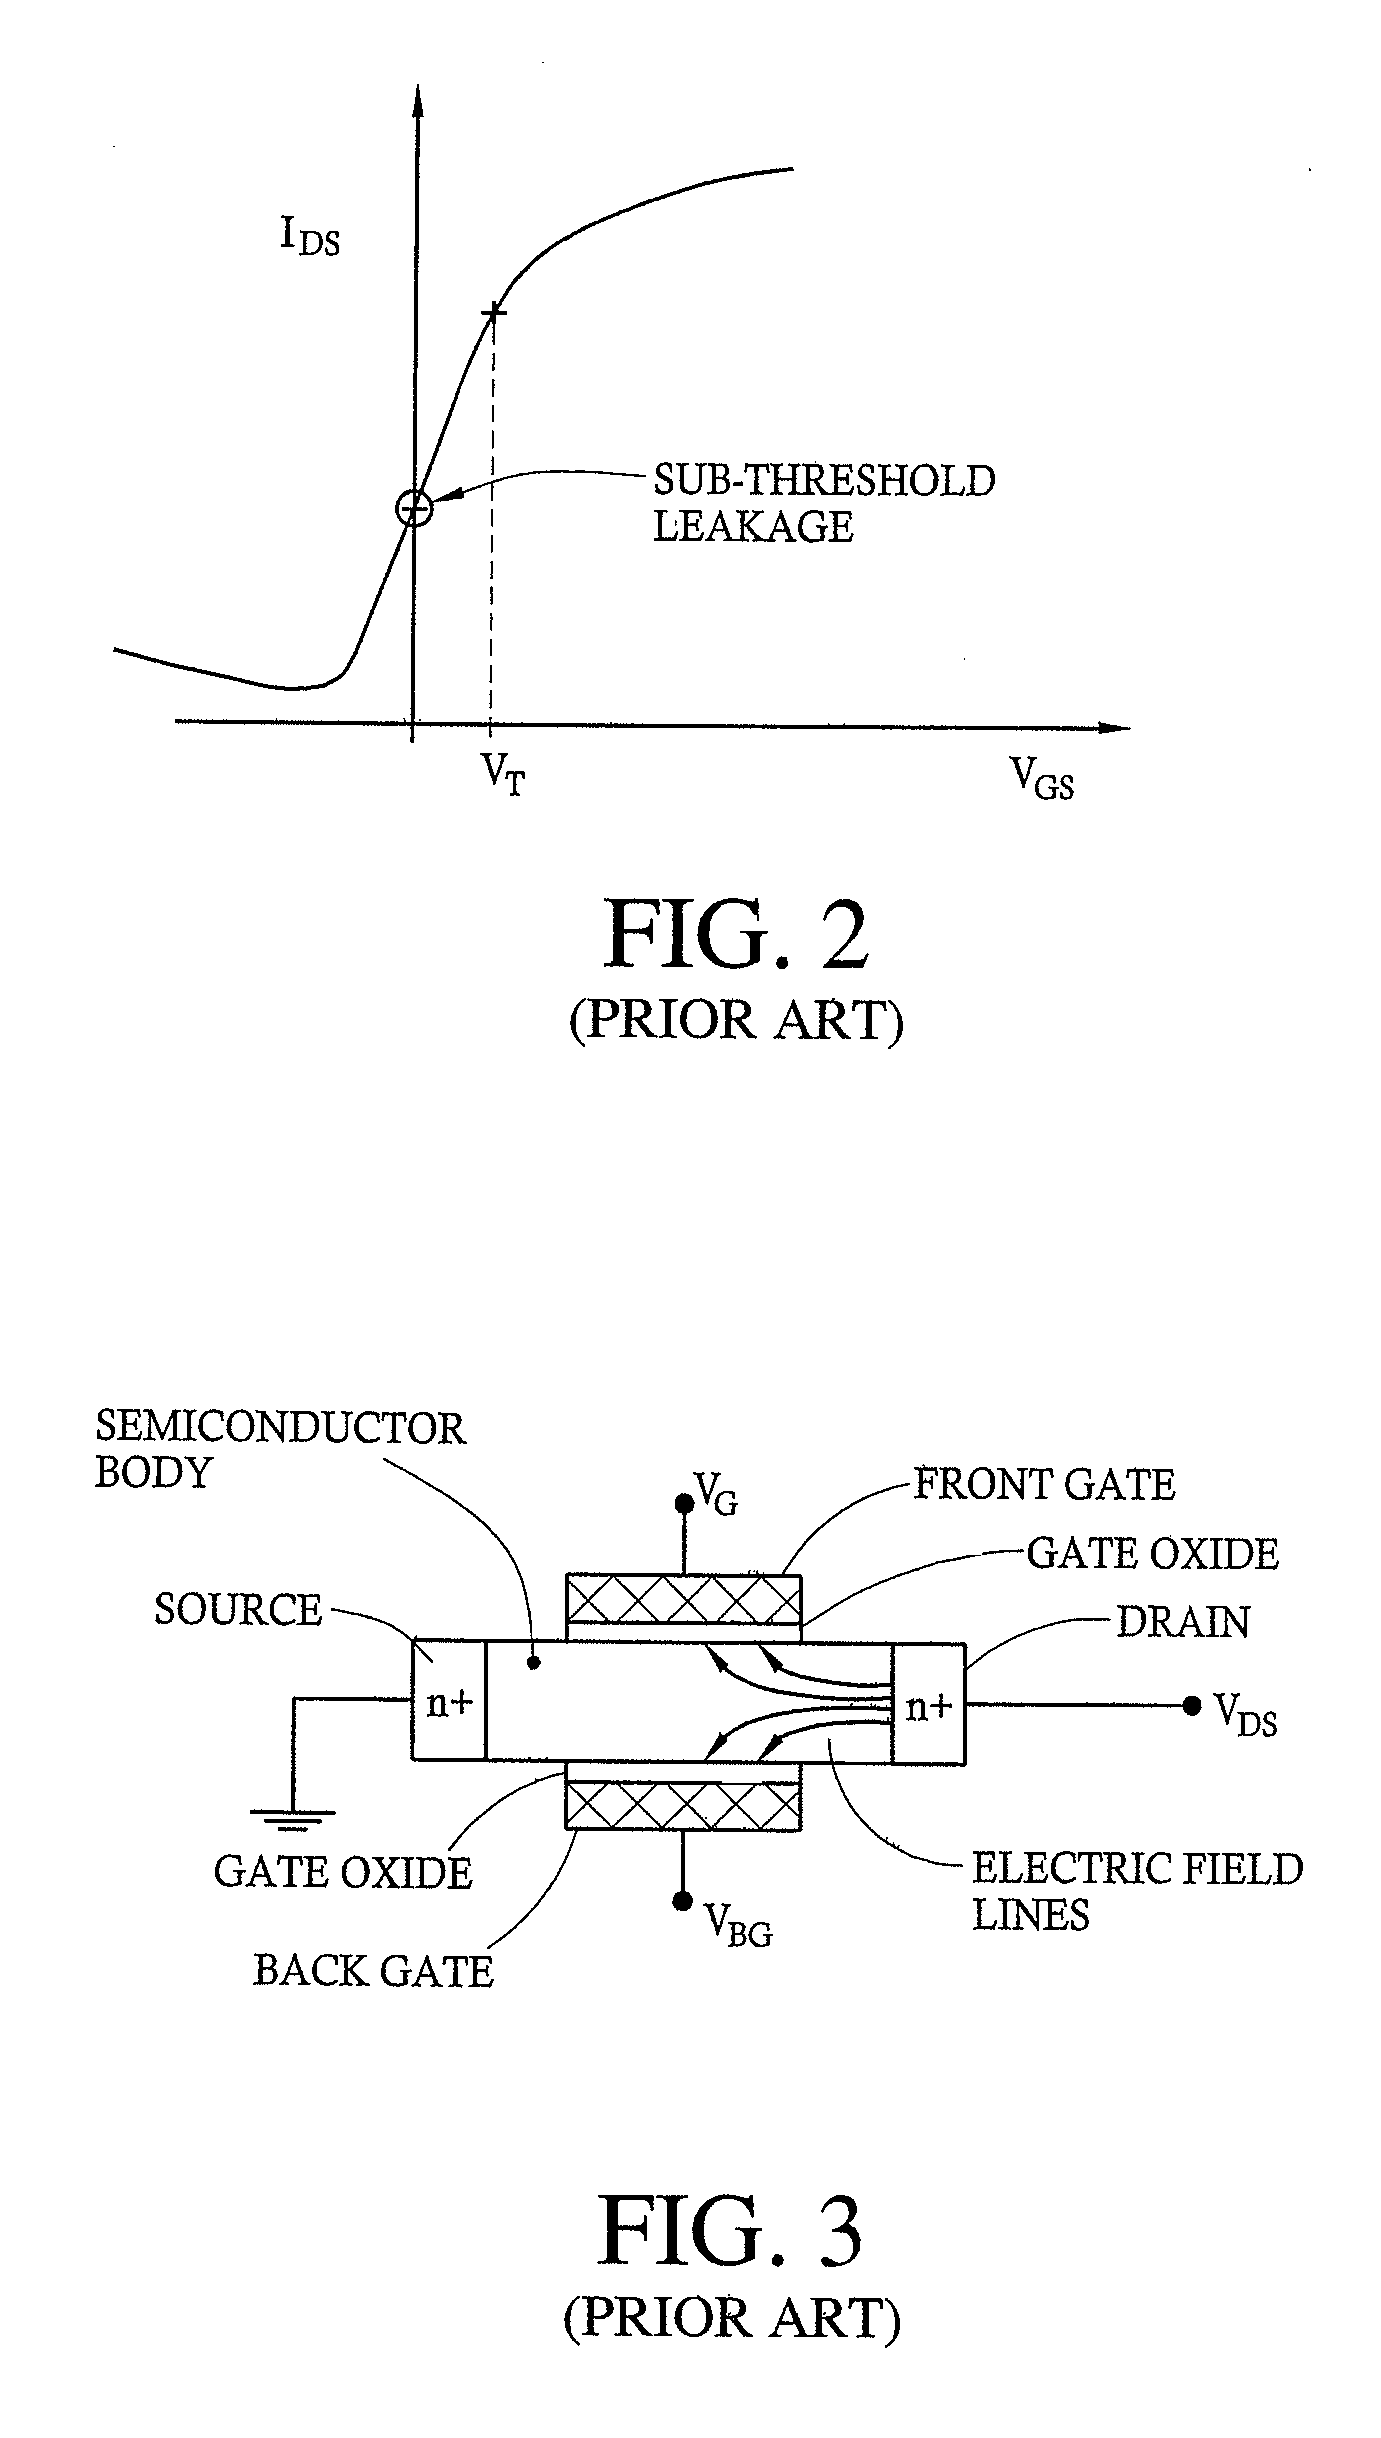 Memory array with surrounding gate access transistors and capacitors with global and staggered local bit lines